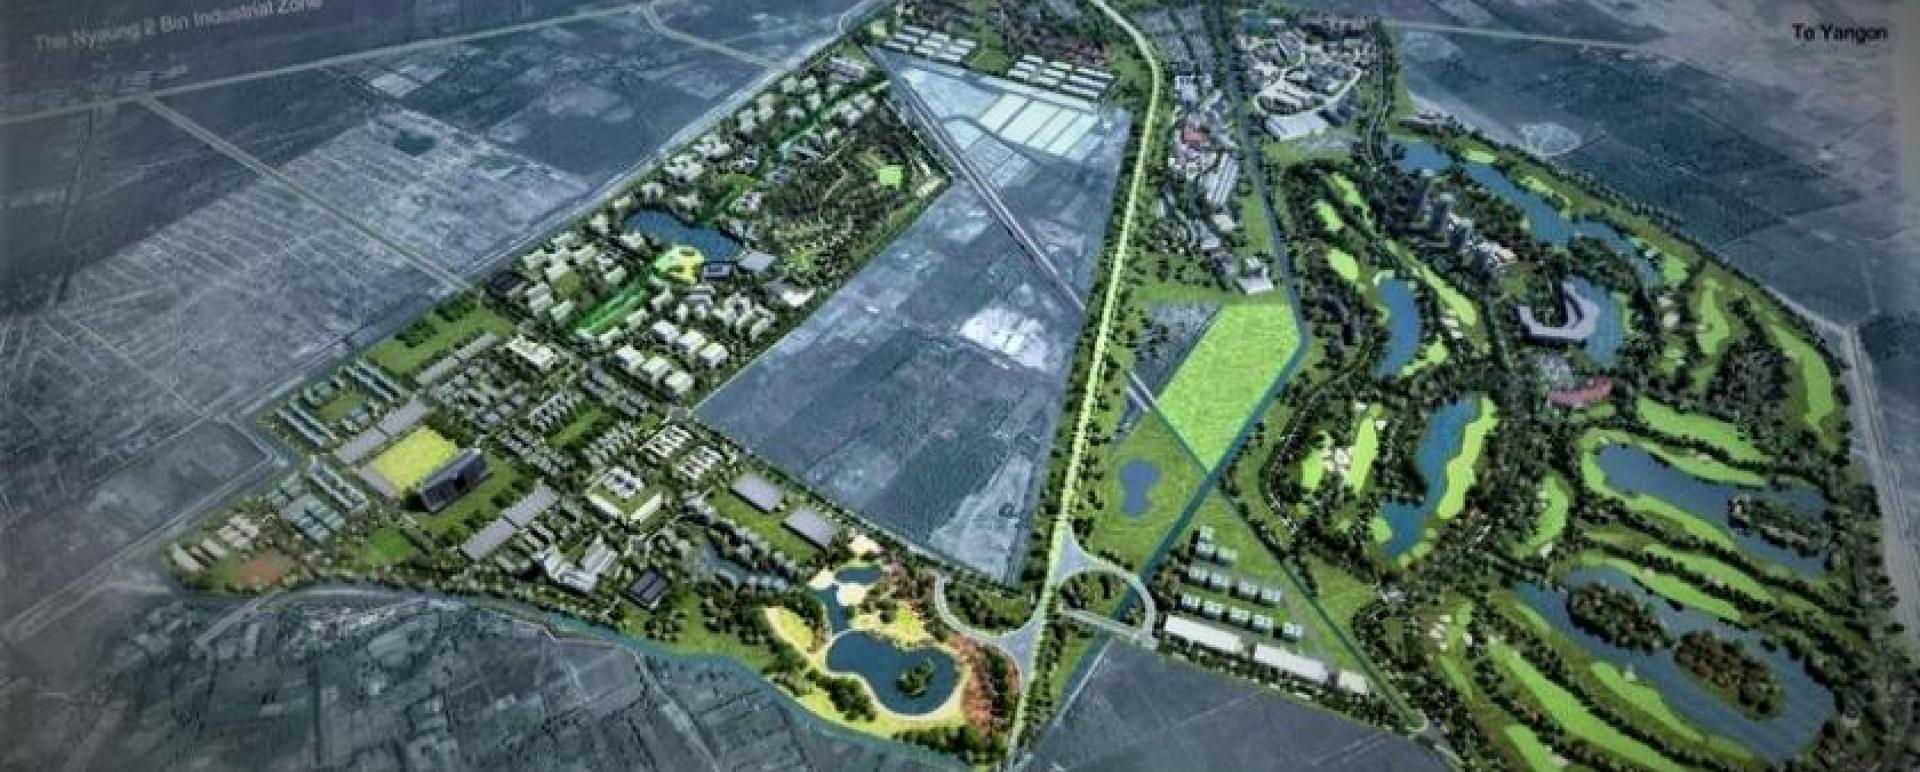 Eco Green City Project to be implemented in Hlegu Township (Photo-Eco Green City)